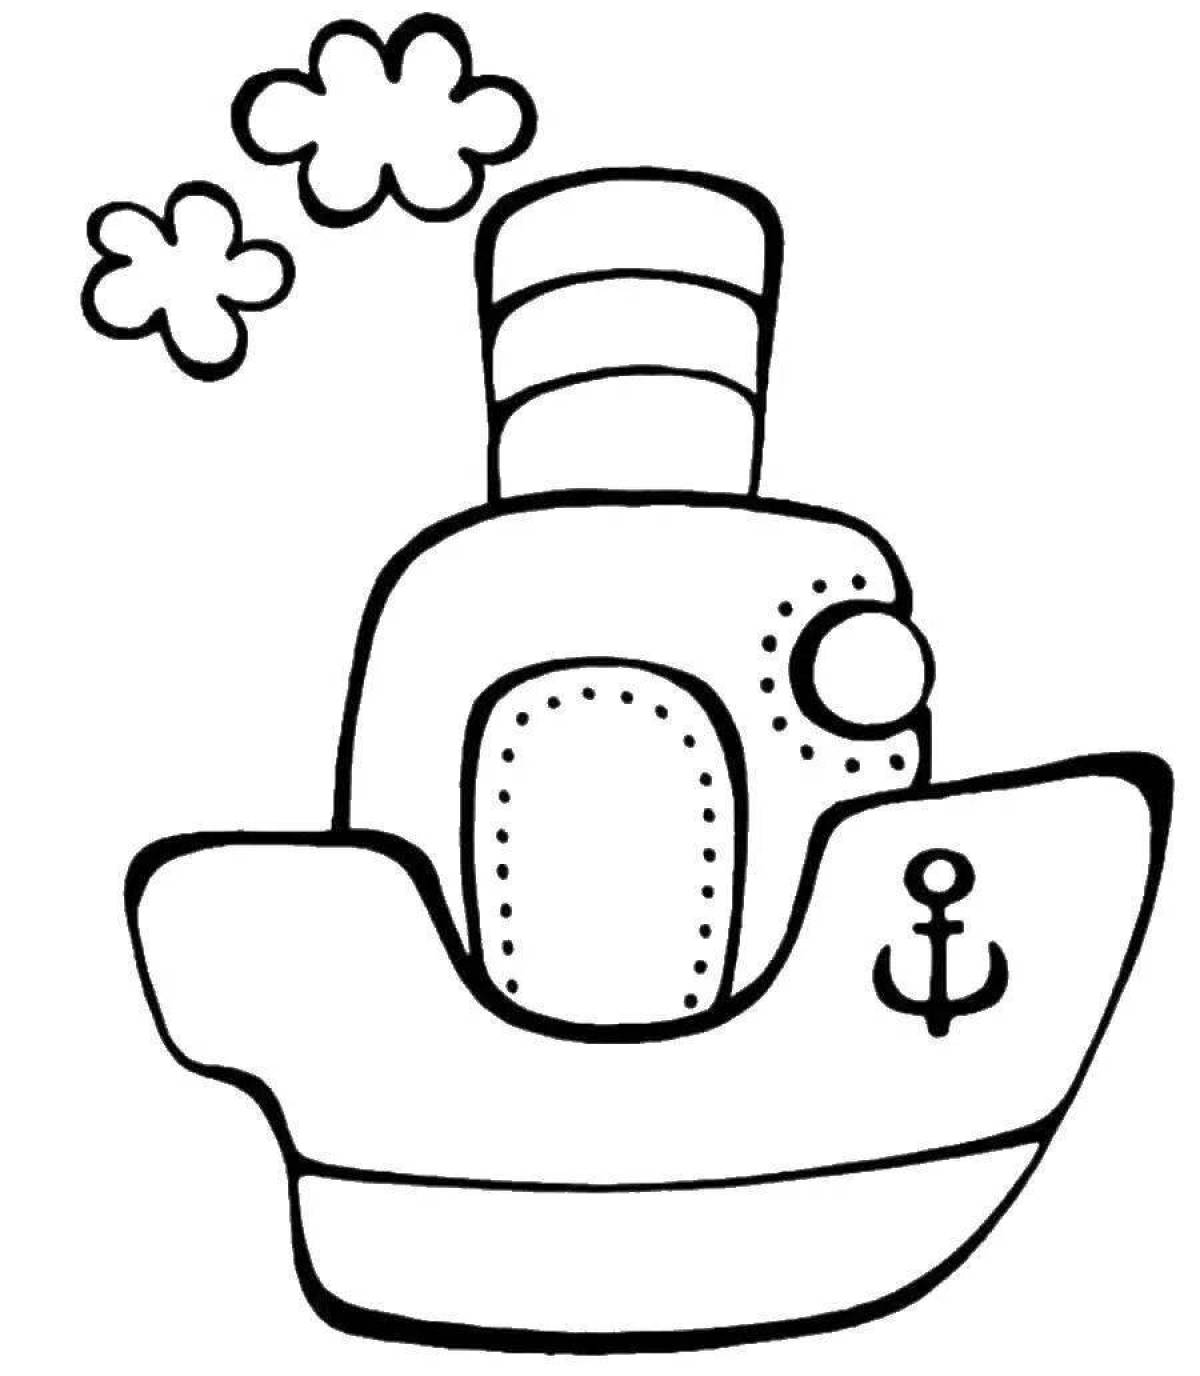 Fun boat coloring for 2-3 year olds